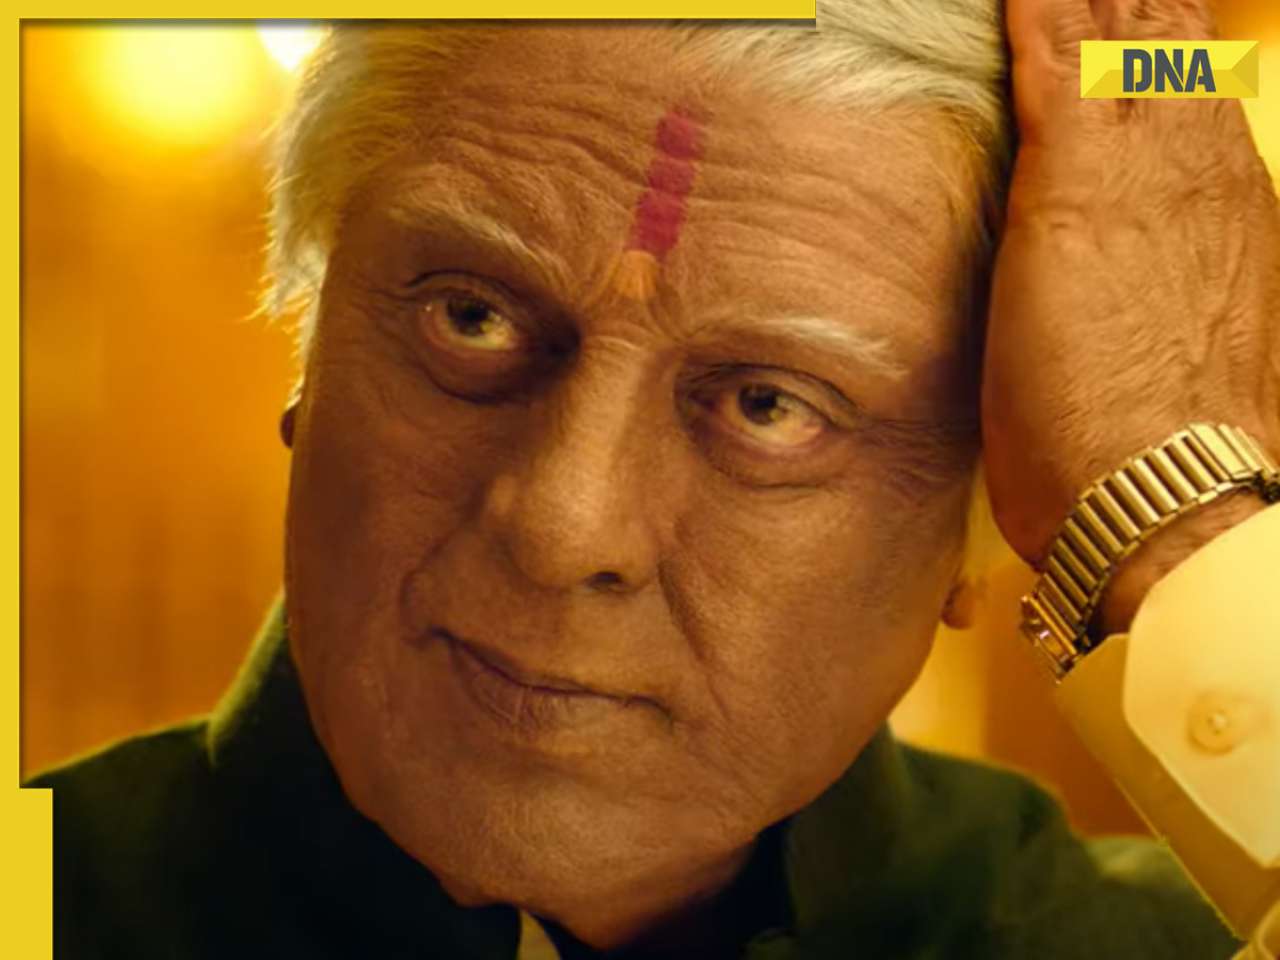 Indian 2 trailer: Kamal Haasan's Senapathy leads second war of independence, fans say 'Rs 1000 crore confirmed'